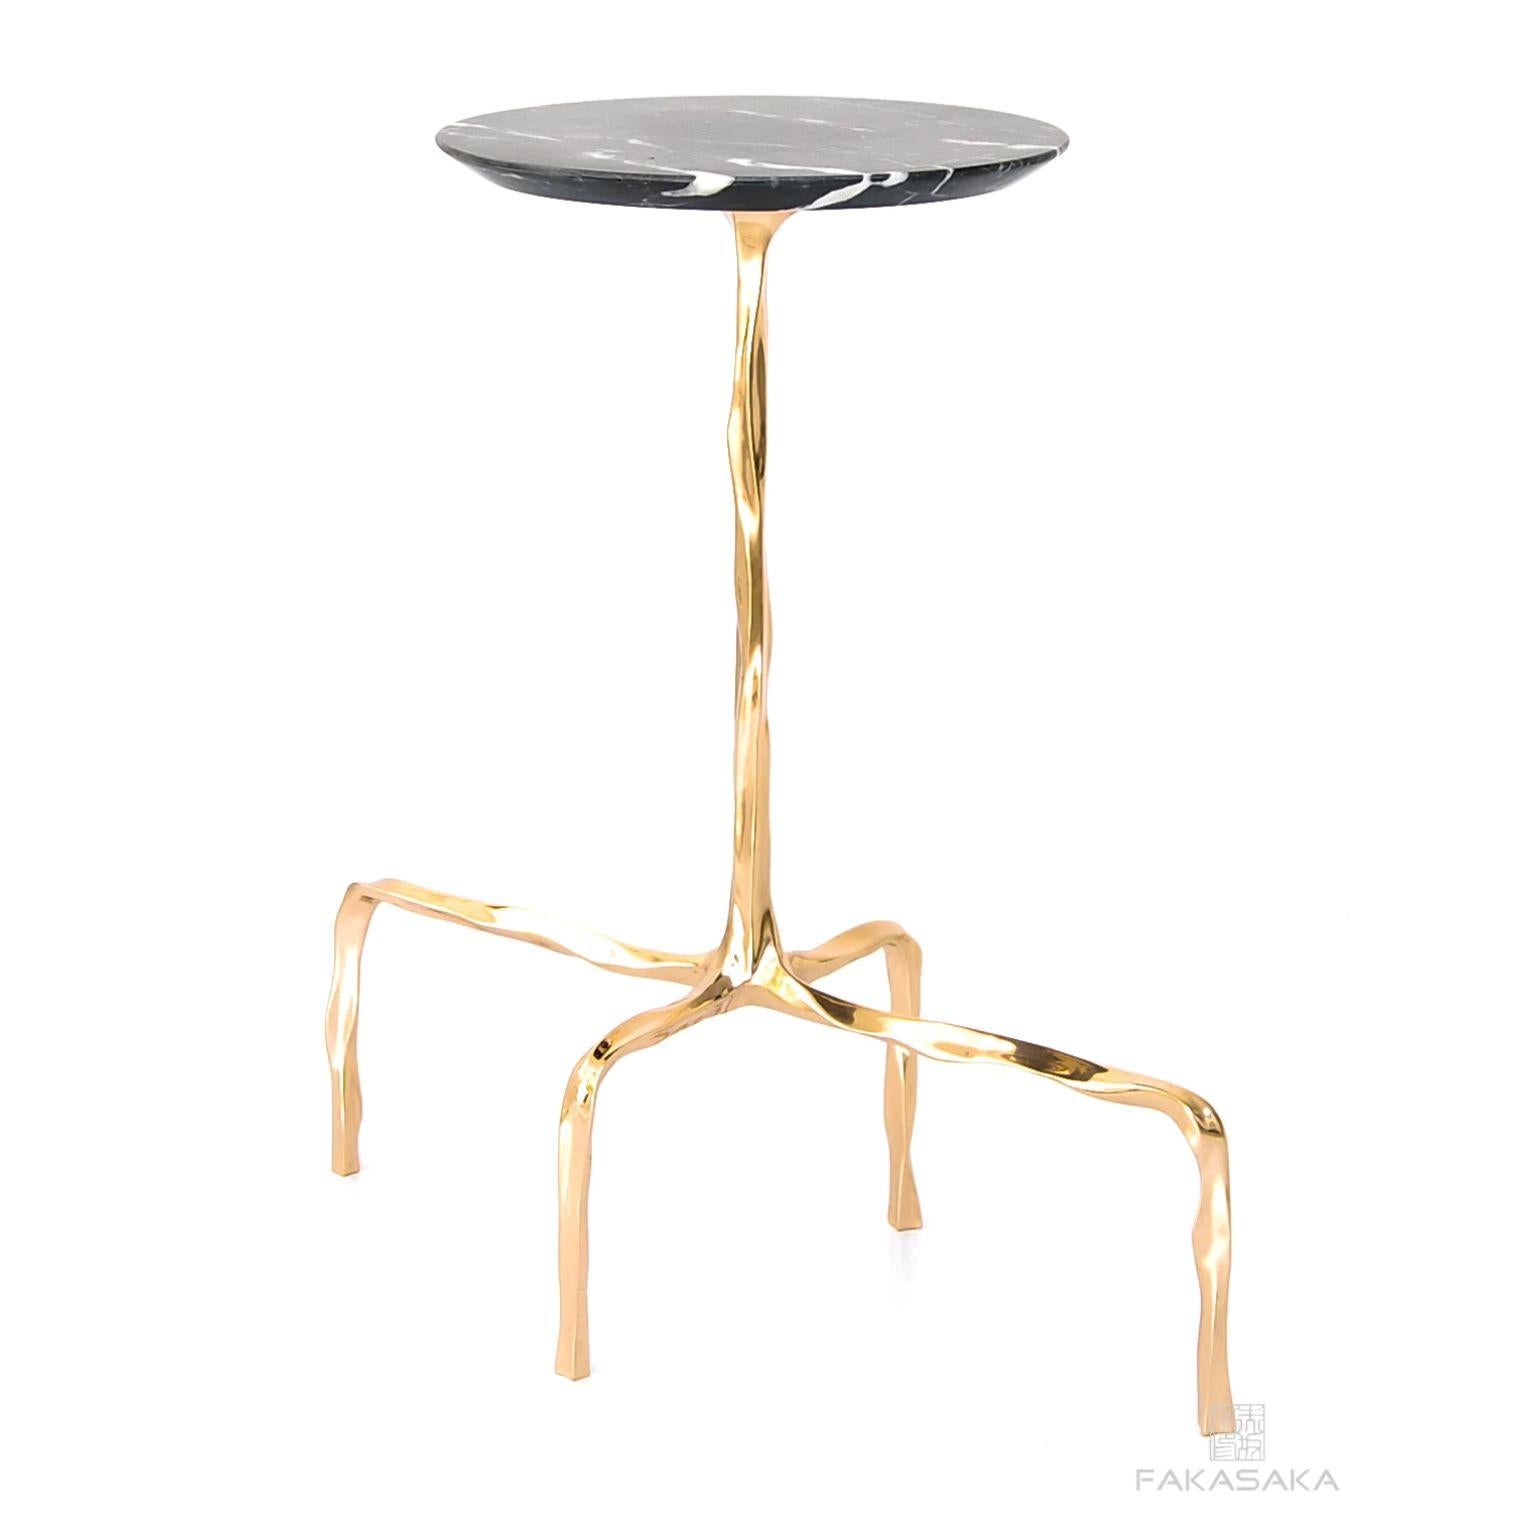 Presley drink table with Nero Marquina Marble top by Fakasaka Design.
Dimensions: W 58 cm D 28 cm H 60 cm.
Materials: polished bronze base, Nero Marquina marble top.
Also available in different table top materials (Agate).  

 FAKASAKA is a